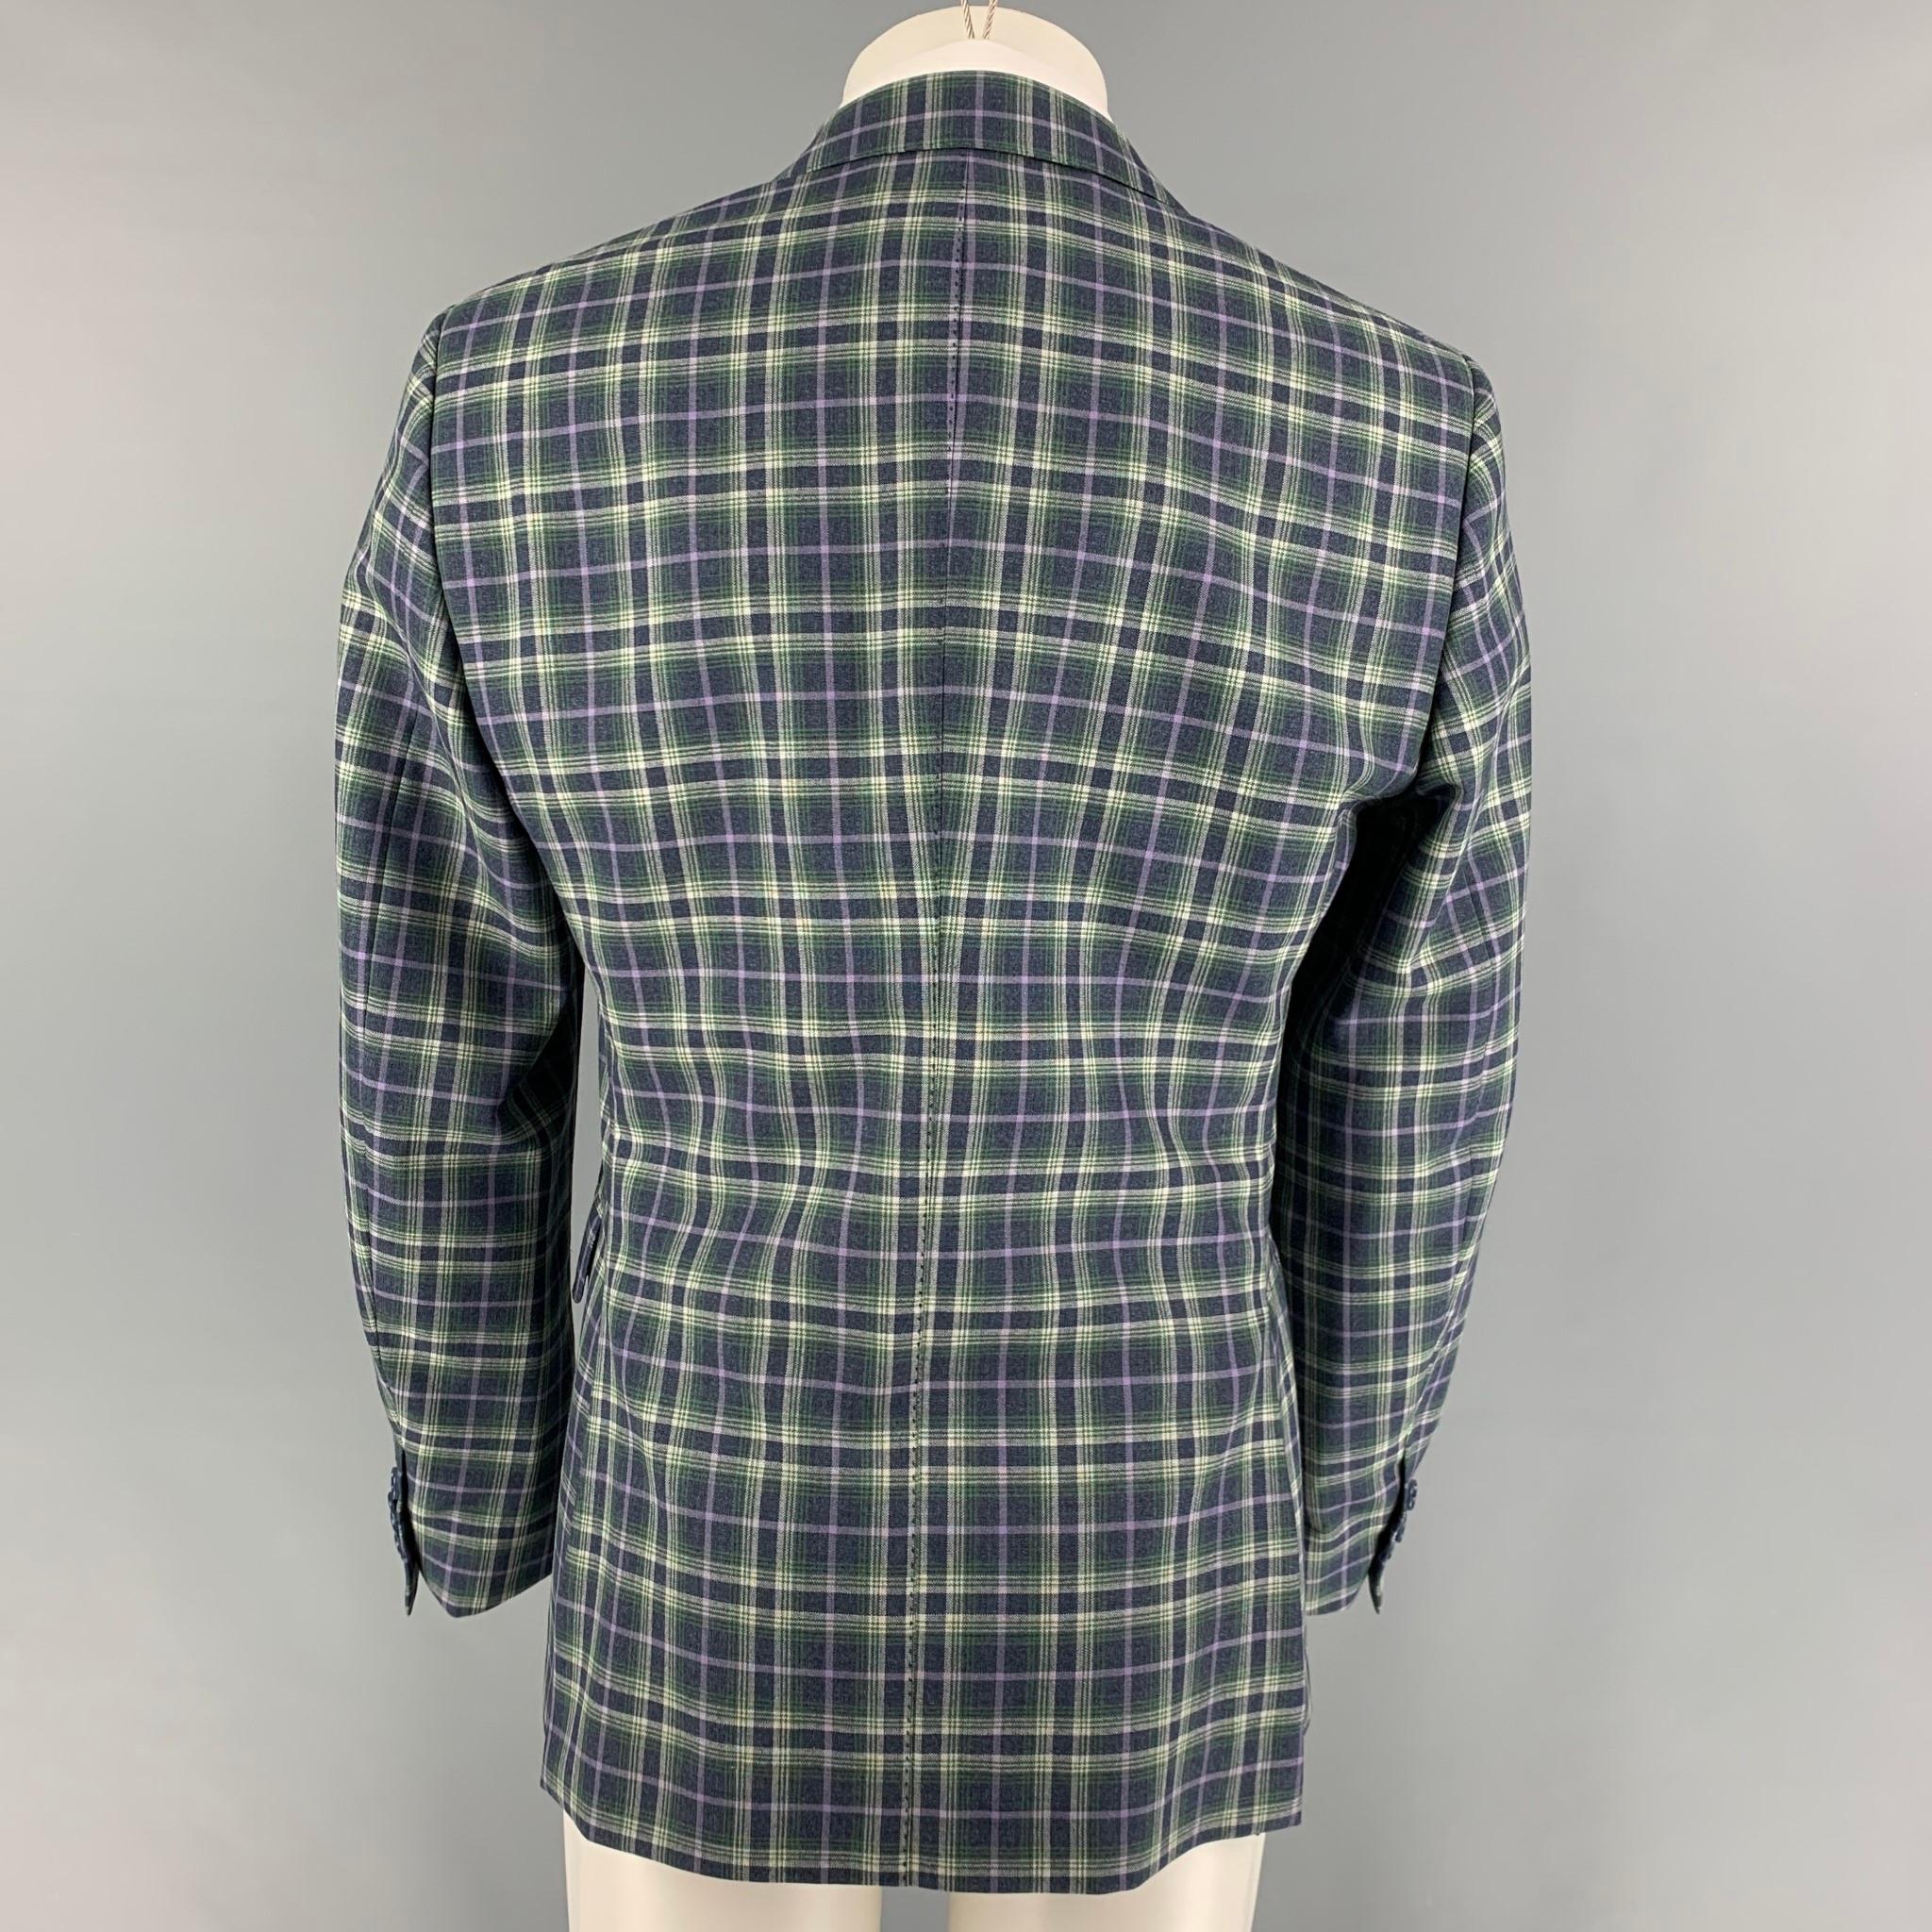 green and white checkered jacket